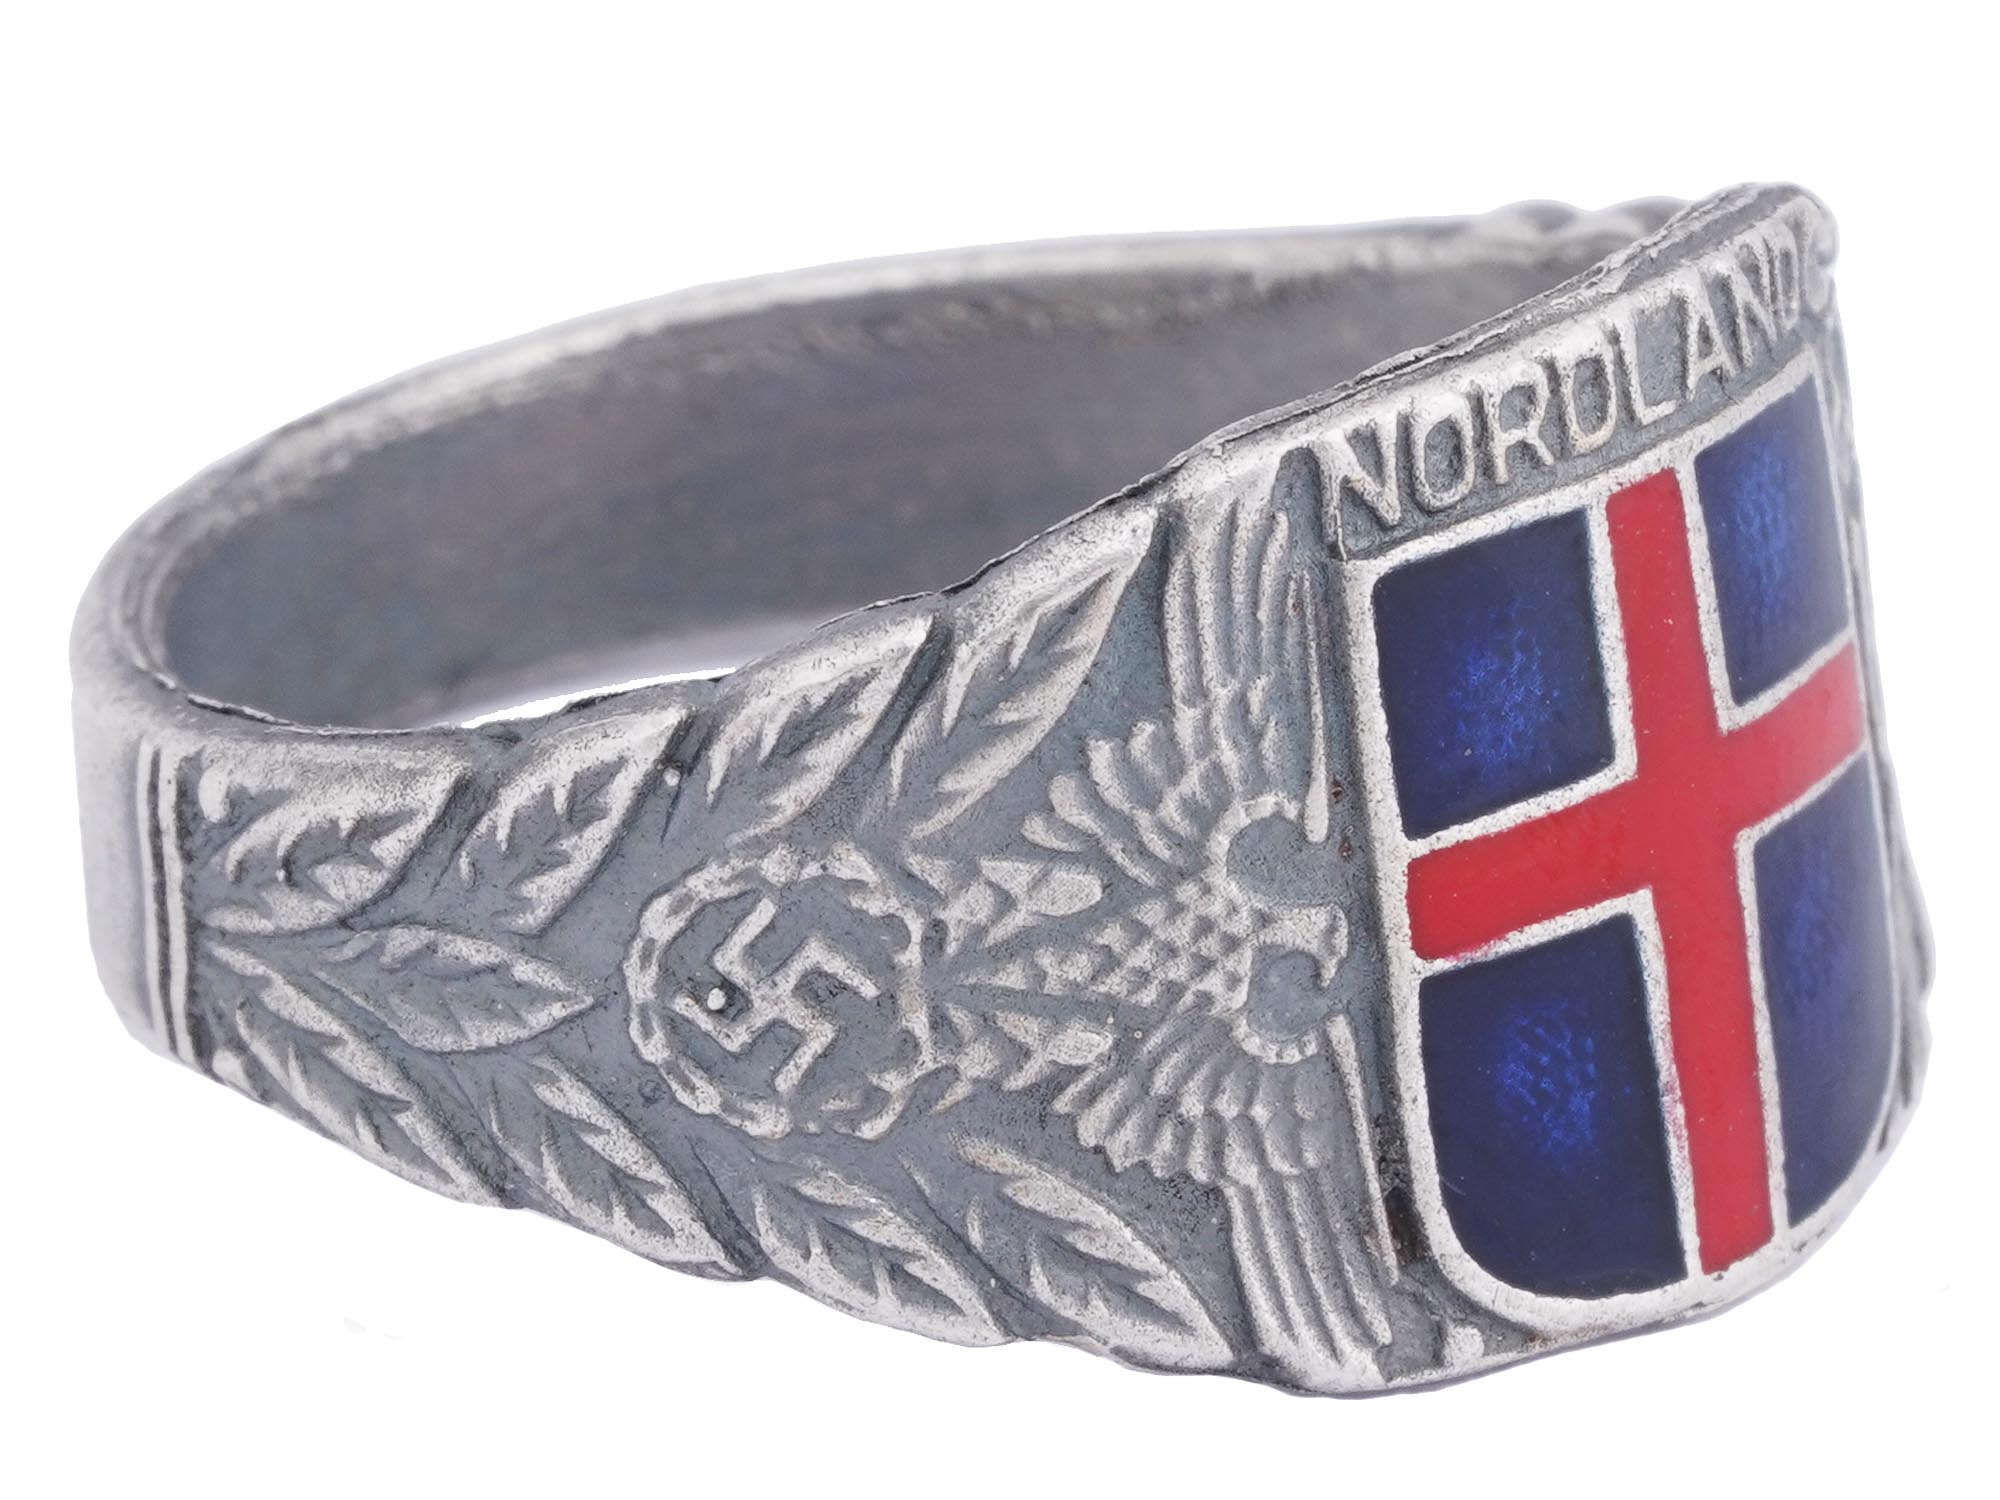 WWII GERMAN WAFFEN SS WIKING NORDLAND SILVER RING PIC-1